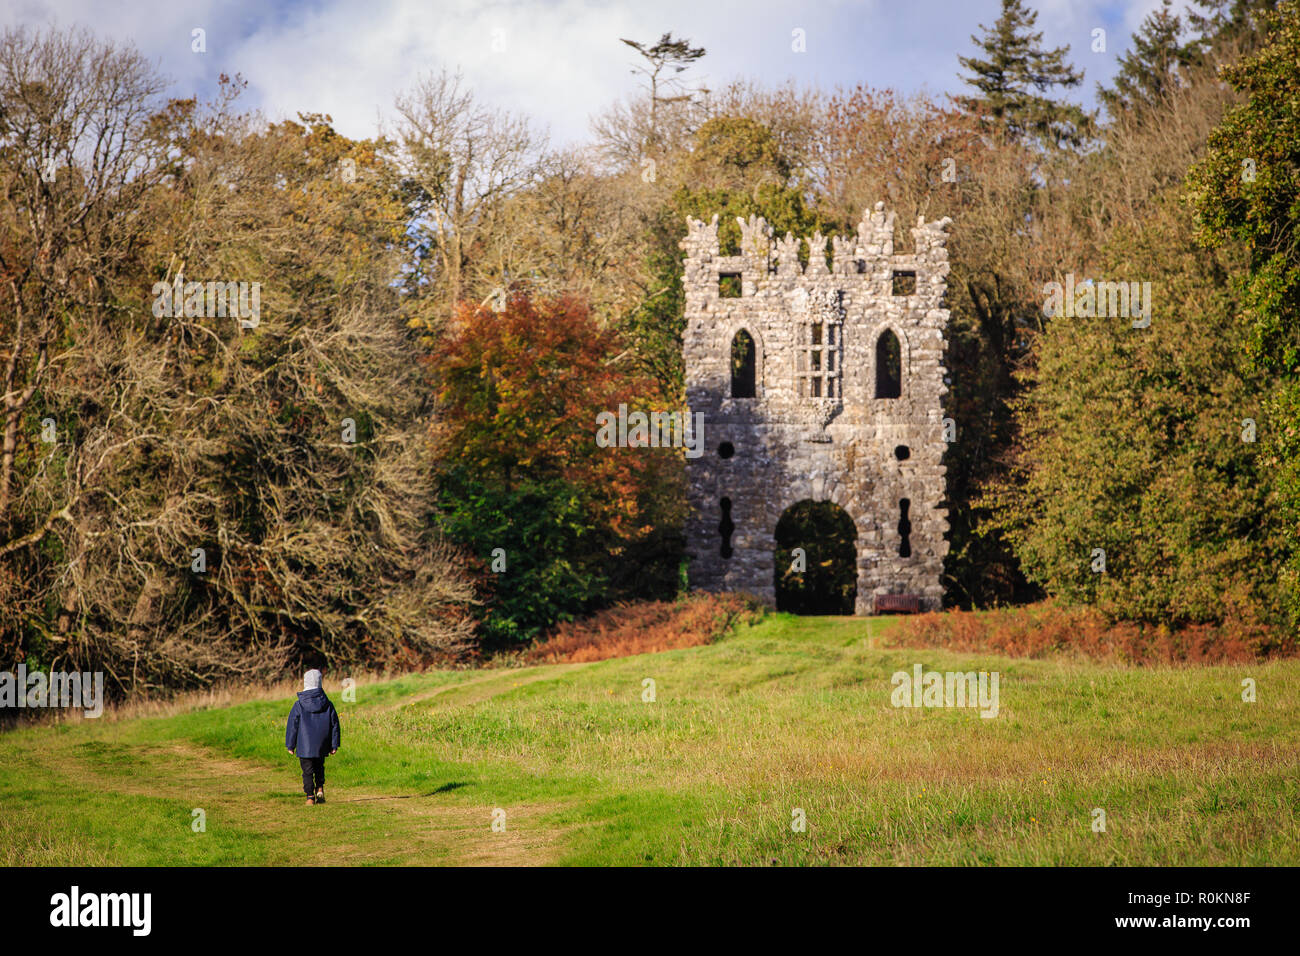 A Folly The Gothic Arch built in 1760 by Robert Rochfort on the ground of Belvedere House and Park and design by Thomas Wright. Mullingar, Ireland Stock Photo